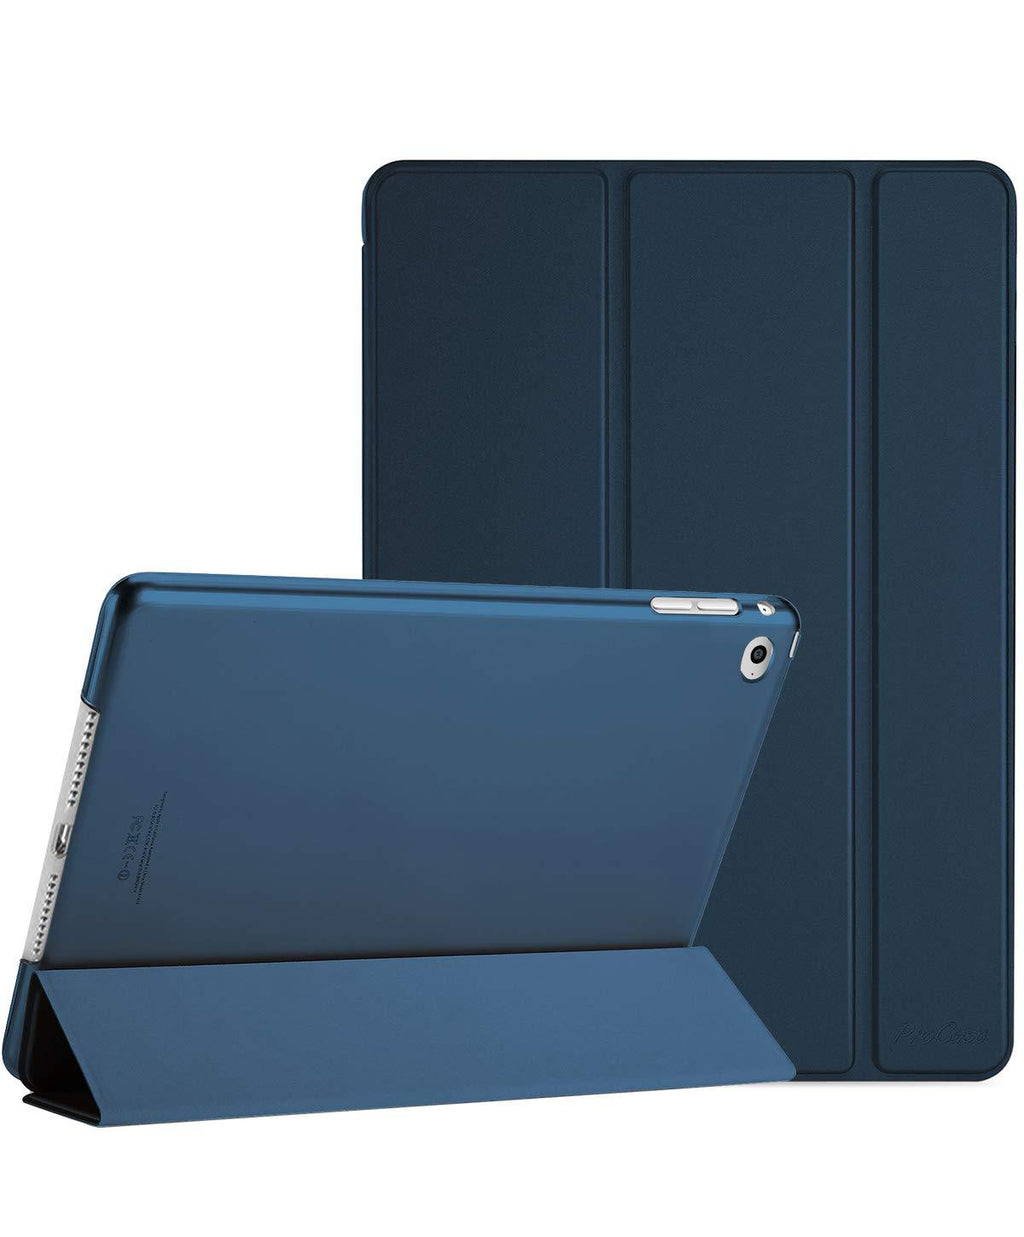  [AUSTRALIA] - ProCase Smart Case for iPad Air 2 (2014 Release), Ultra Slim Lightweight Stand Protective Case Shell with Translucent Frosted Back Cover for Apple iPad Air 2 (A1566 A1567)-Navy Navy